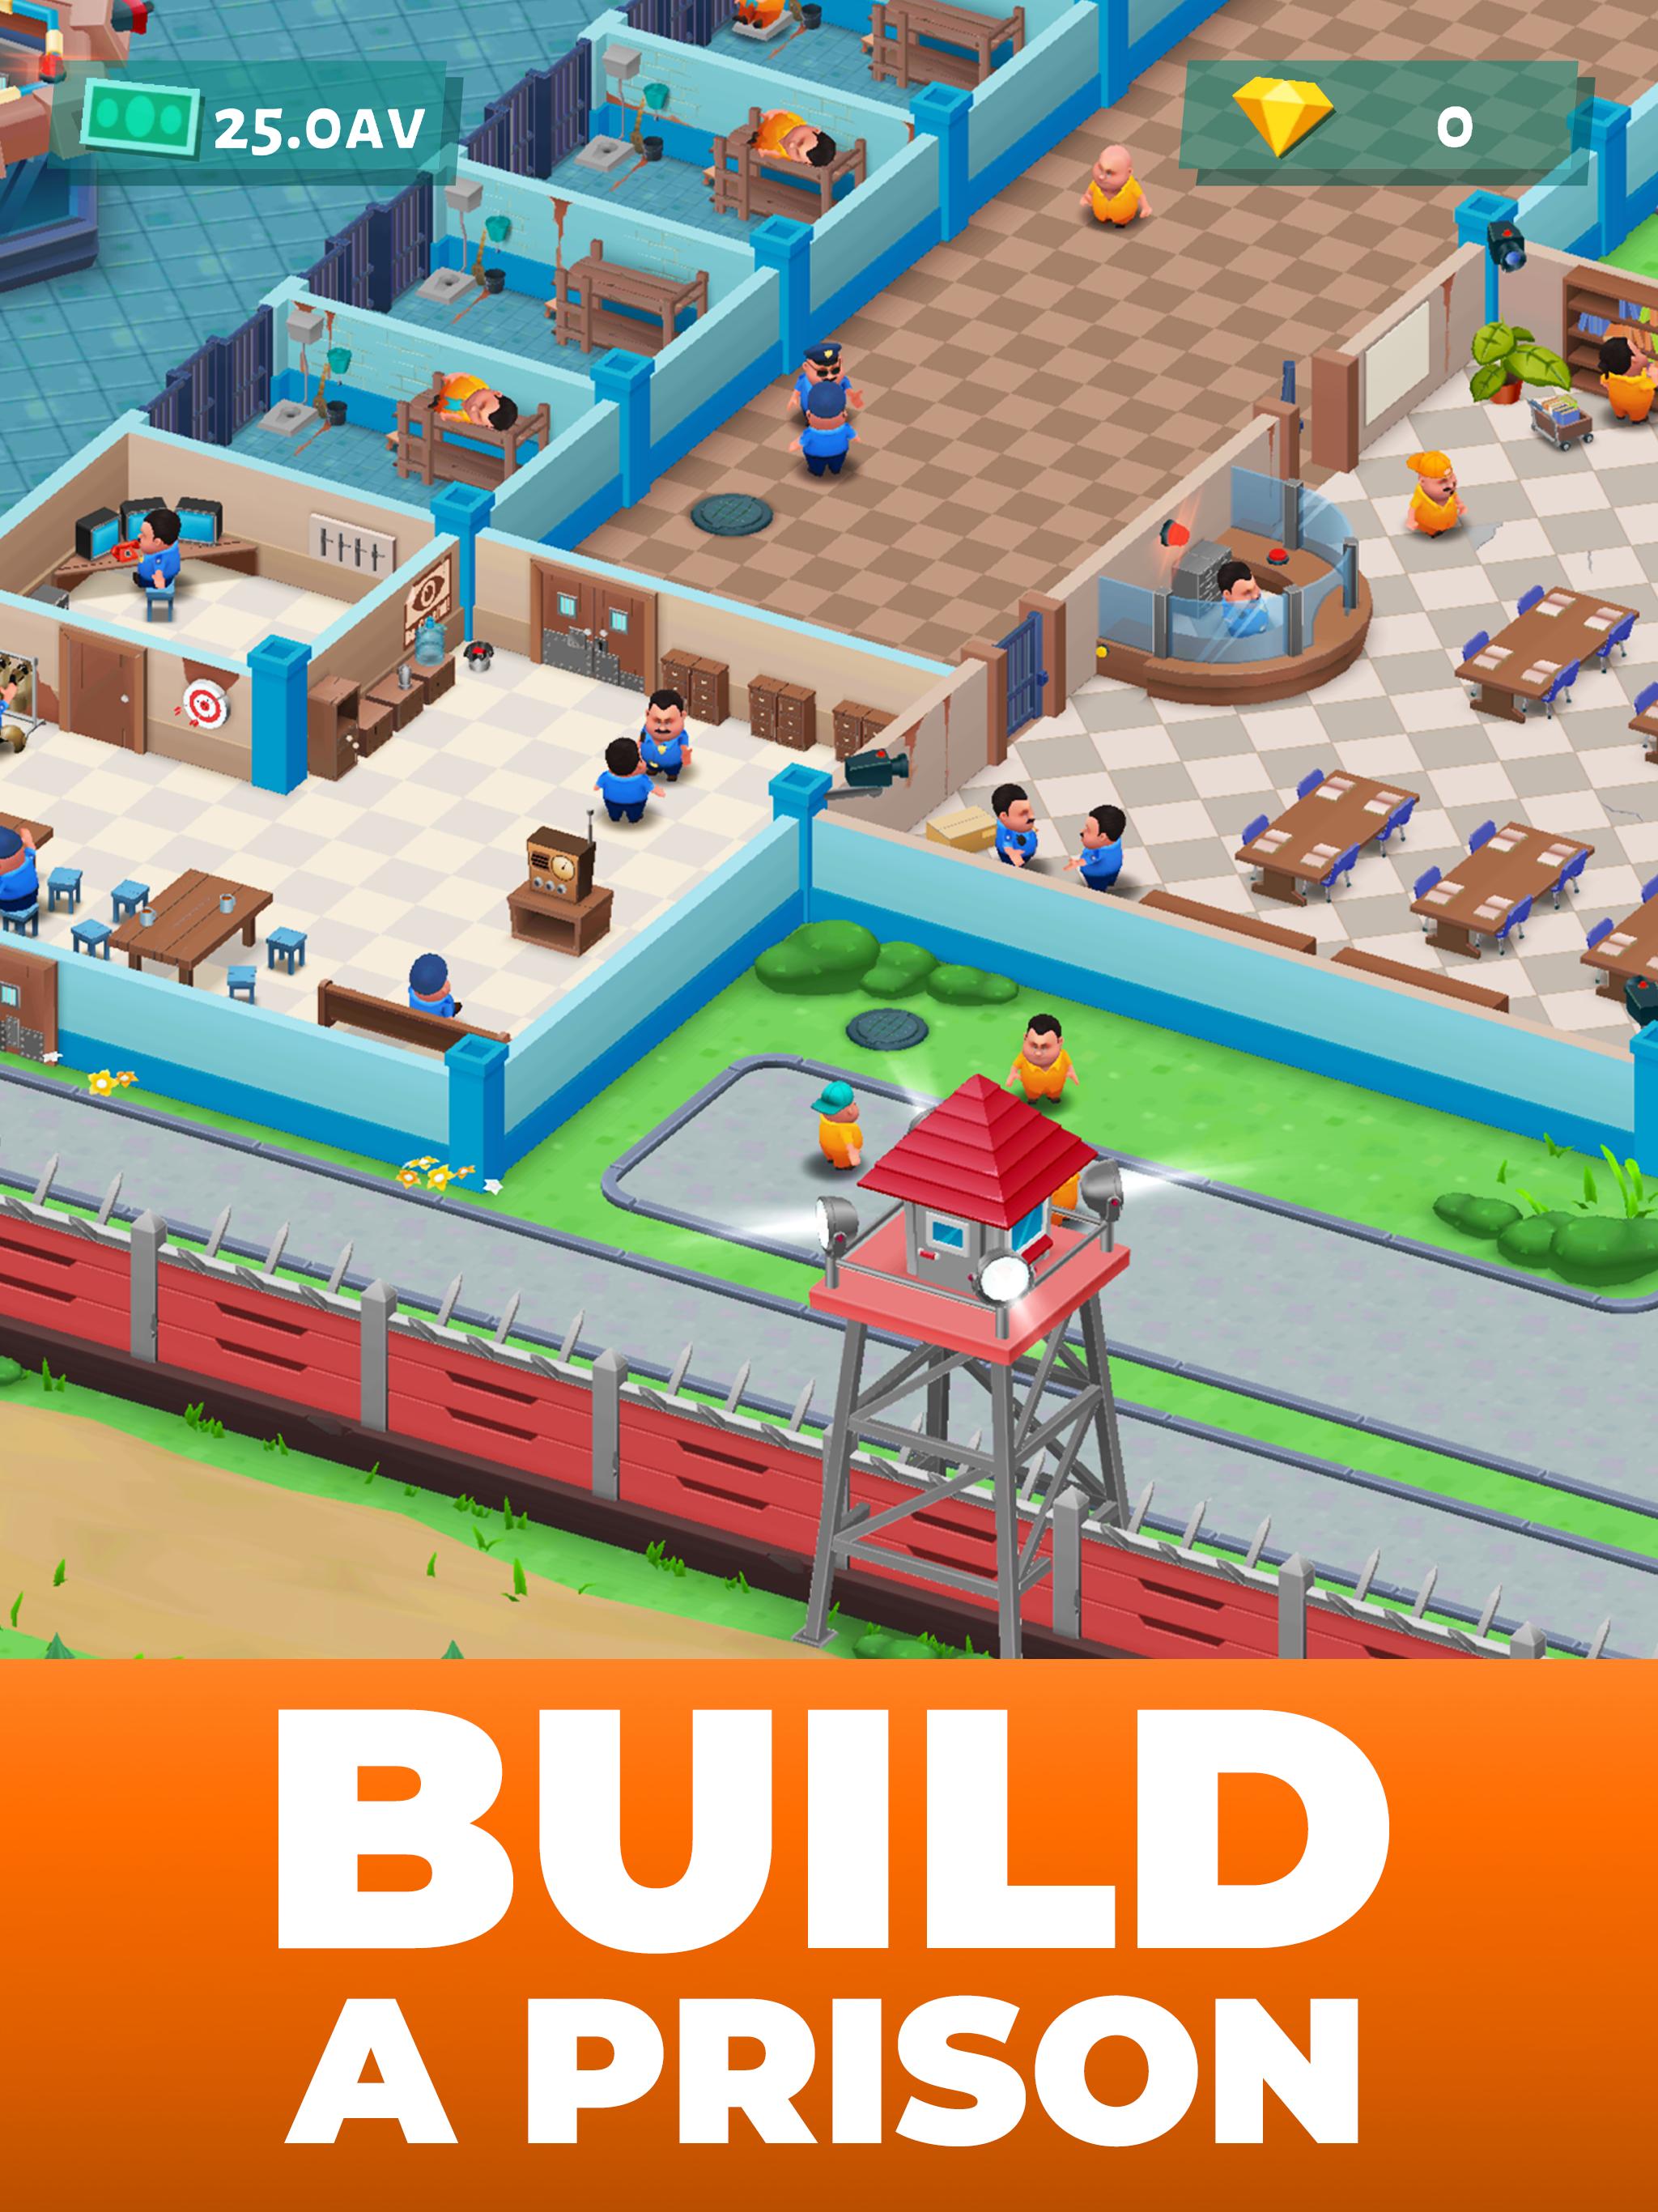 Idle Prison Tycoon Business Manager 0.6 Screenshot 11